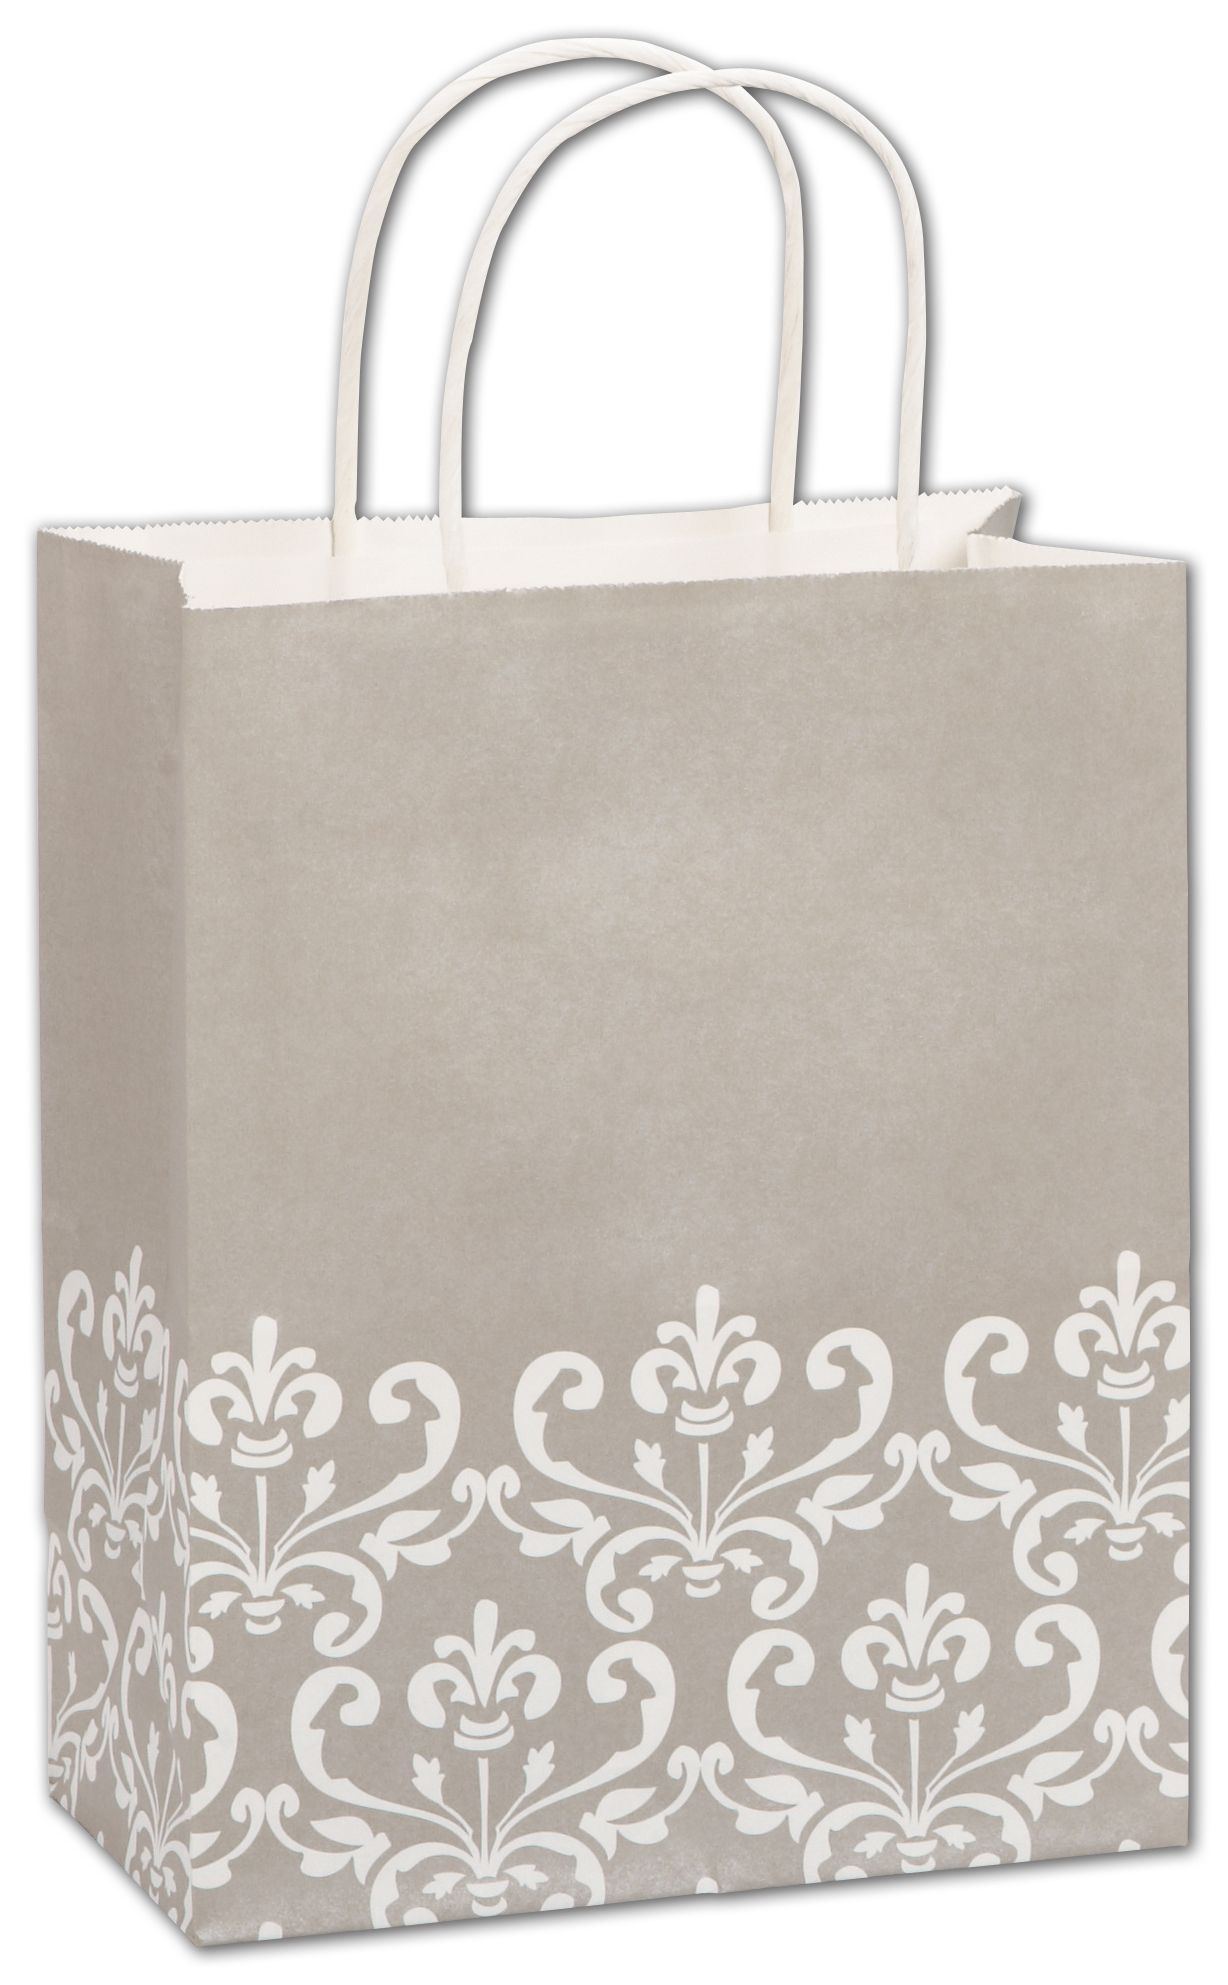 These beautifully elegant shopping bags boast a delicate cream design to match any wrapping style.